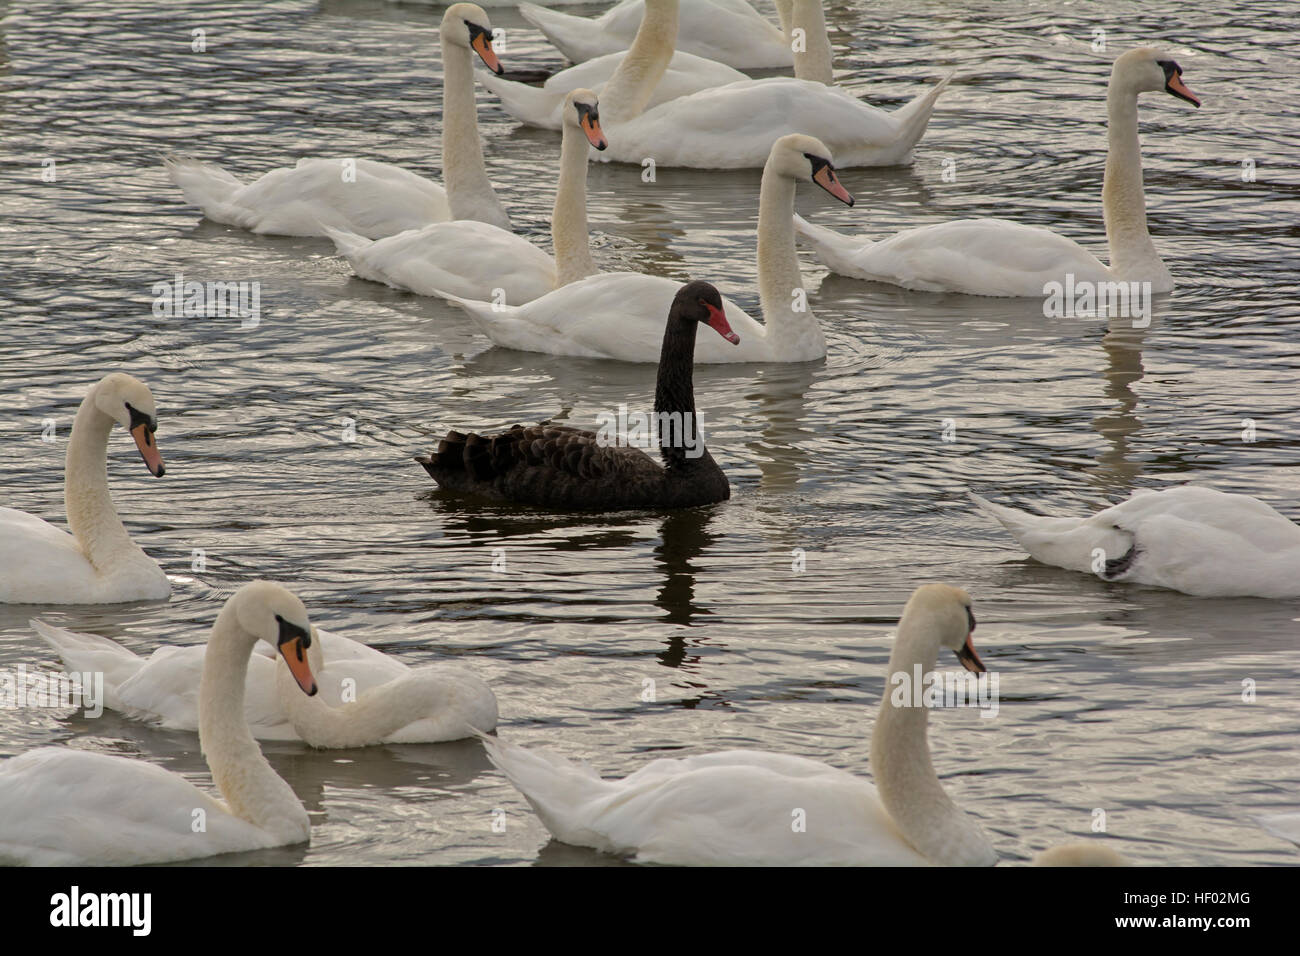 Black swan among a flock of white mute swans Stock Photo